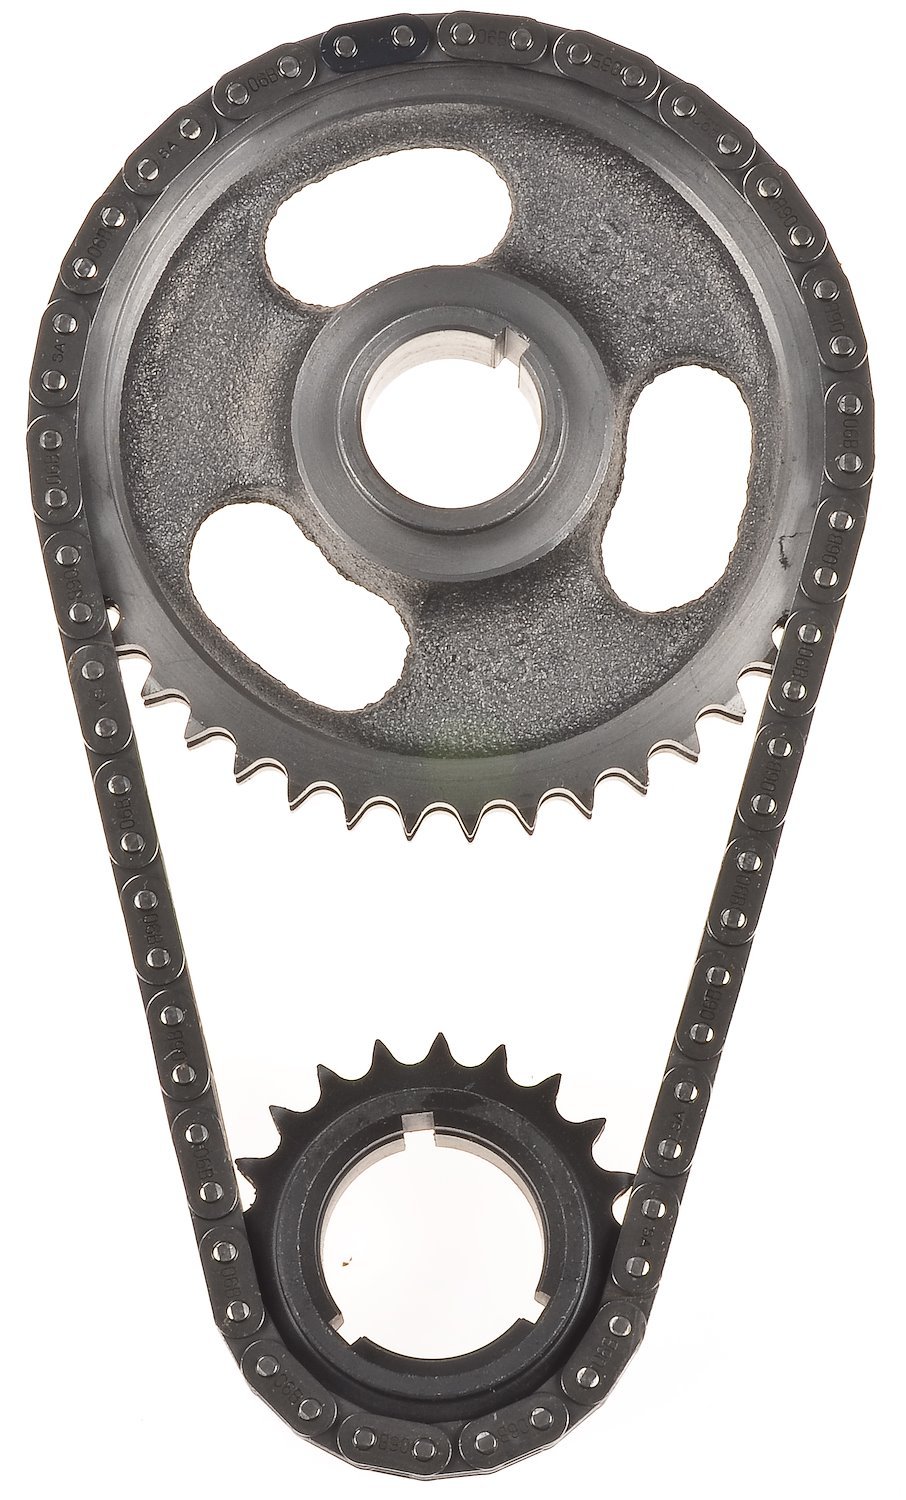 JEGS 20432: Timing Chain Set for 1963-1979 Pontiac 326-455 - JEGS